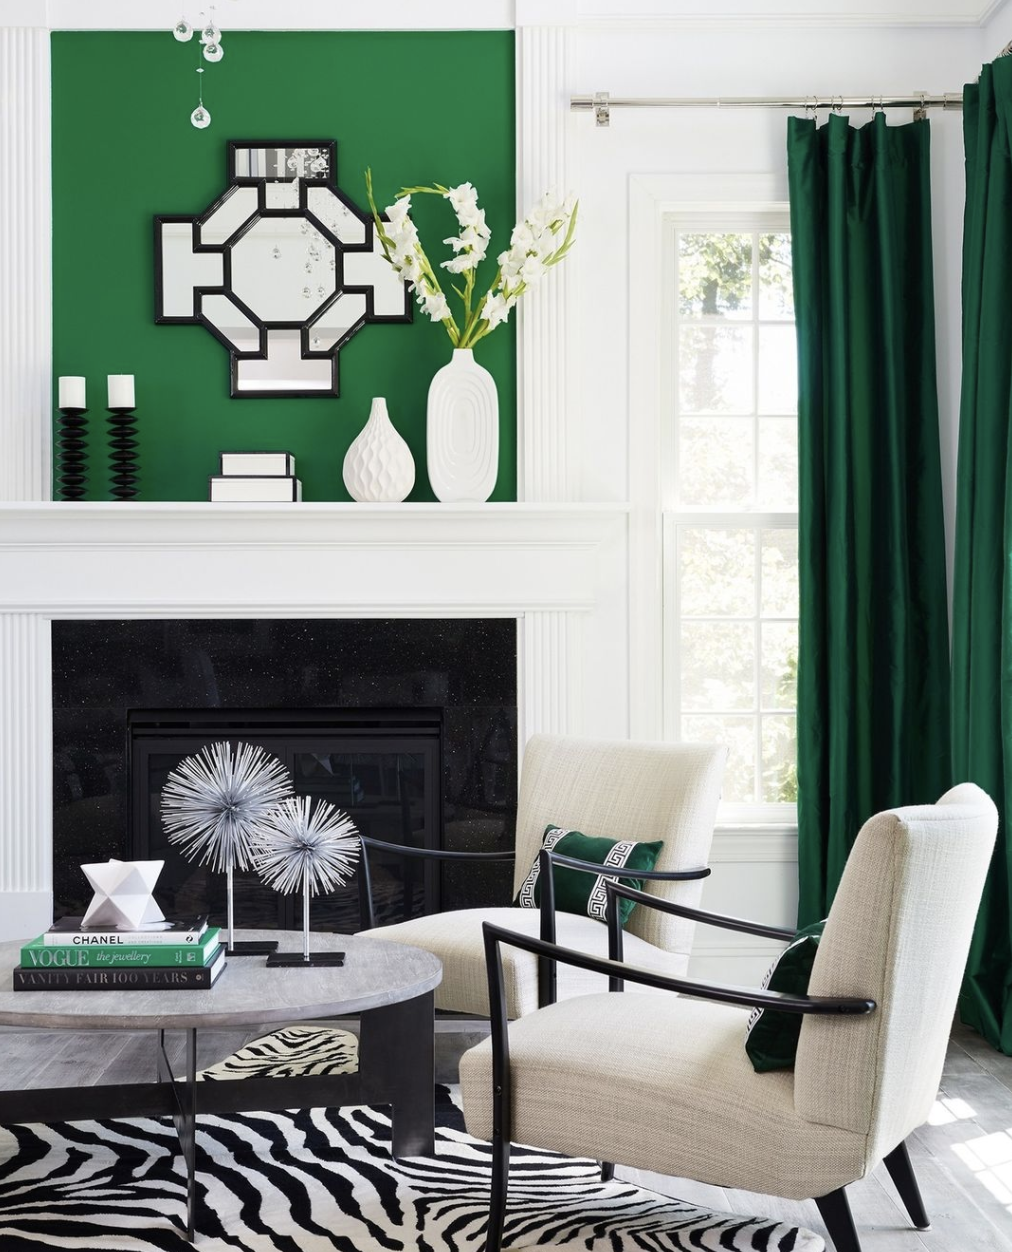 EMERALD GREEN | HOTTEST COLOR TREND FOR 2022